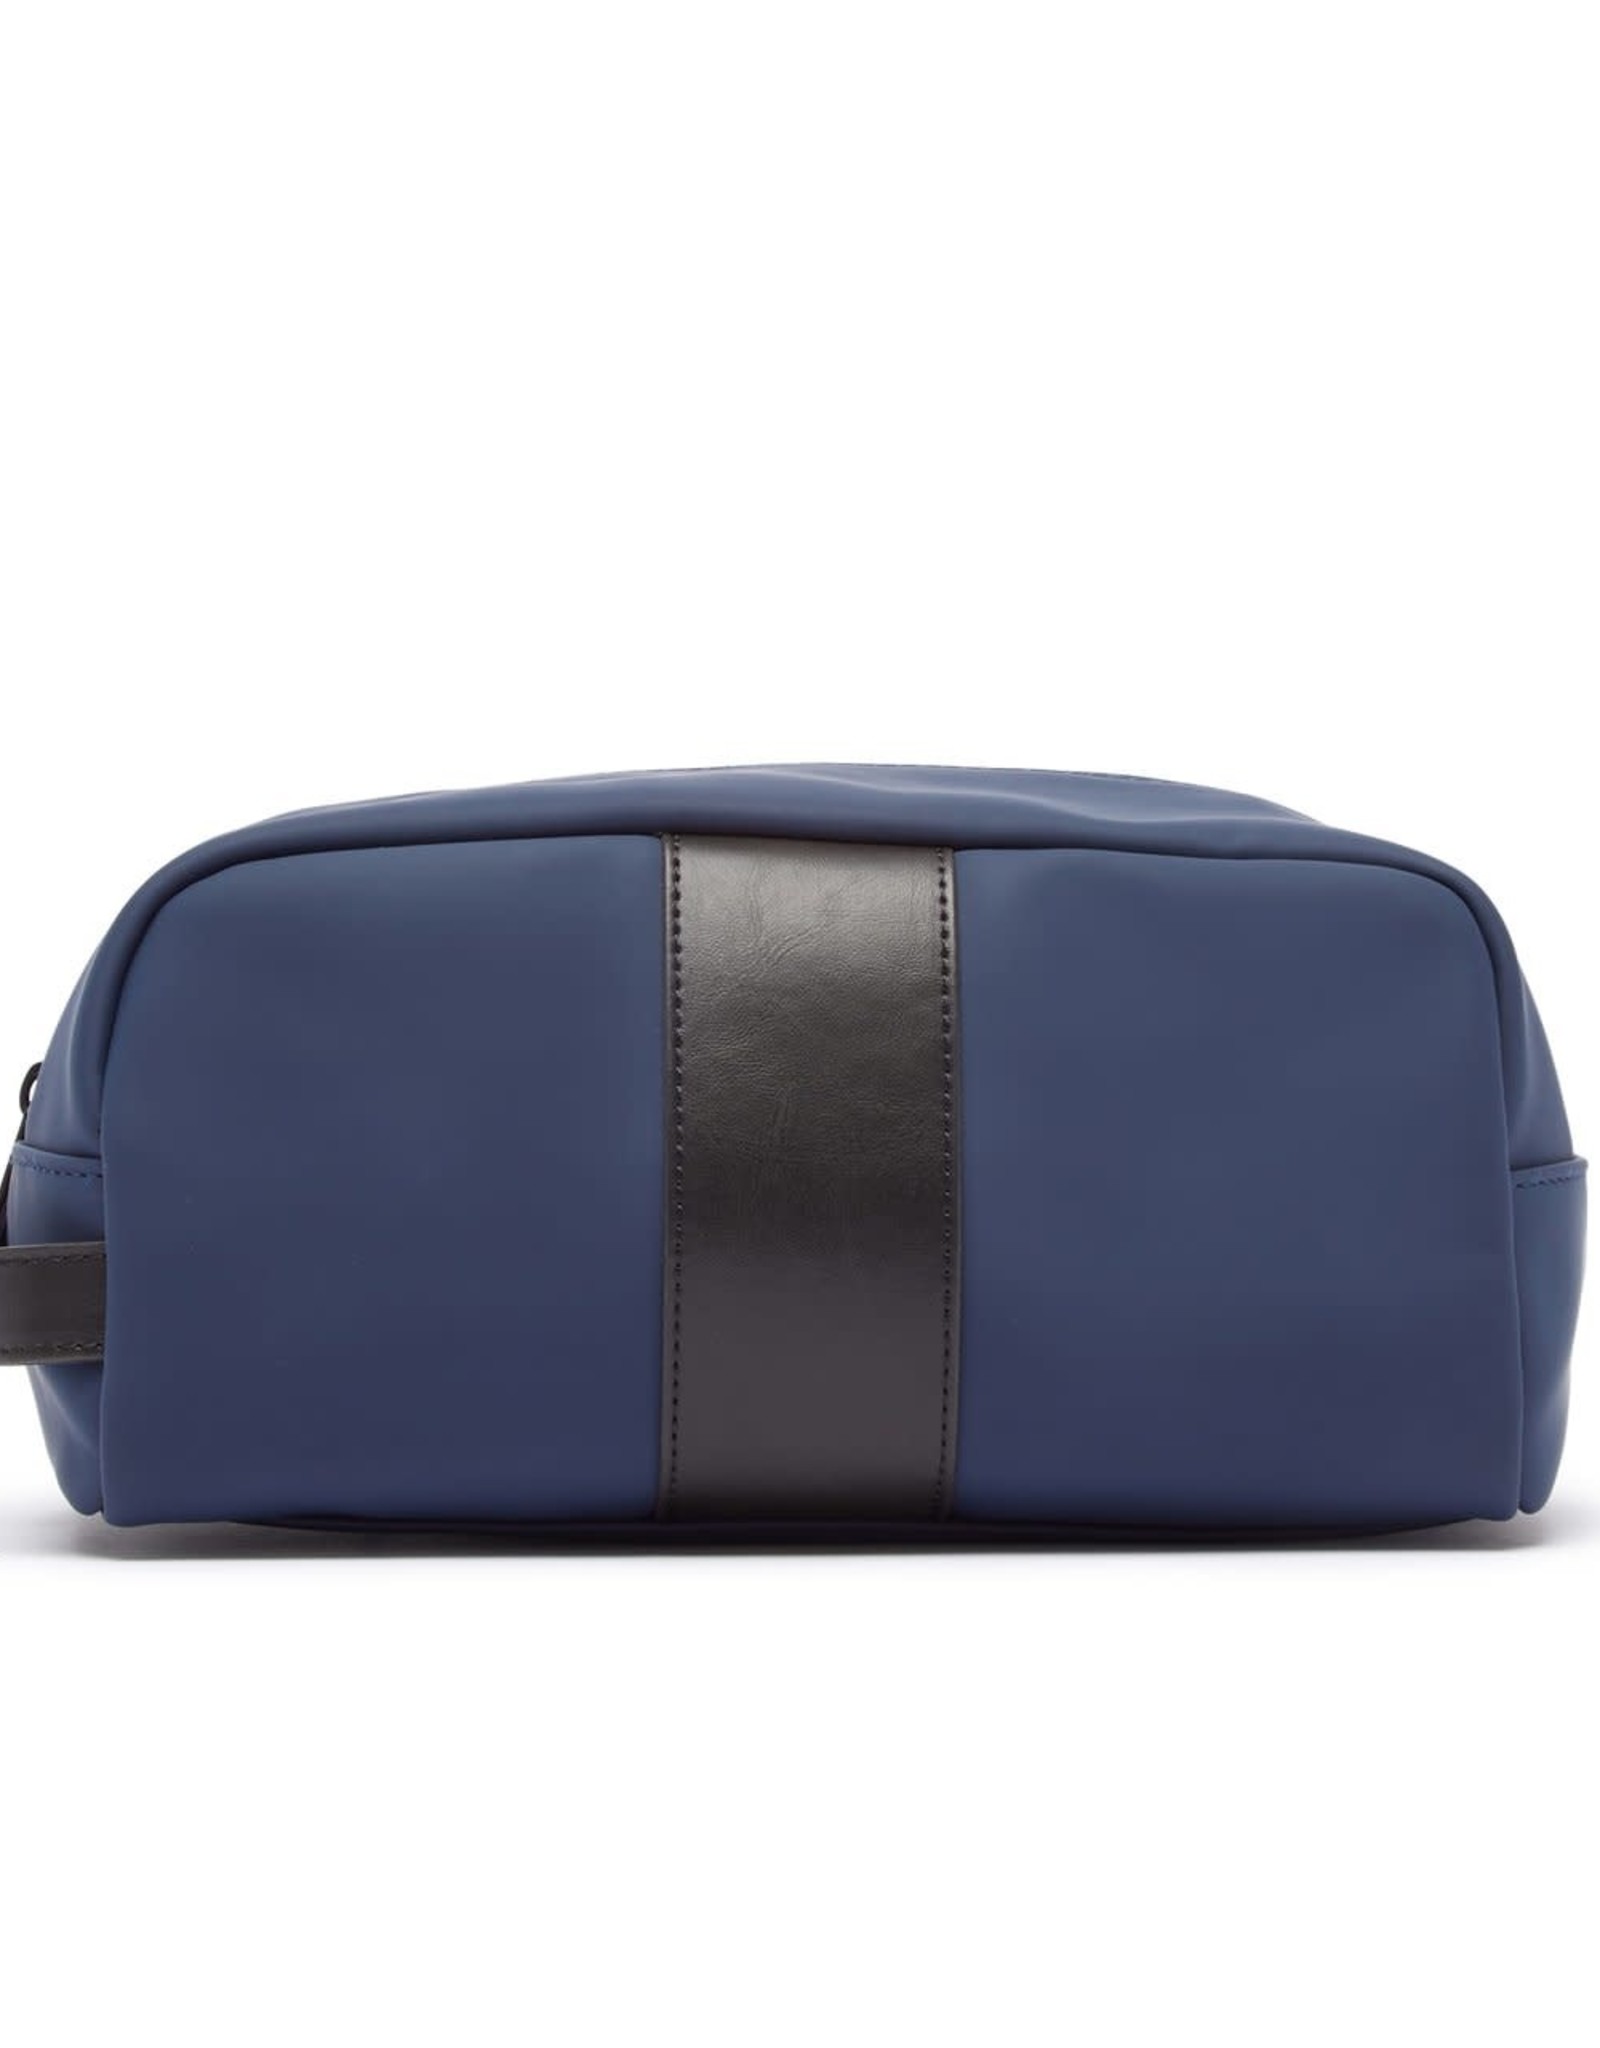 Brouk and Co. Hudson Toiletry Bag